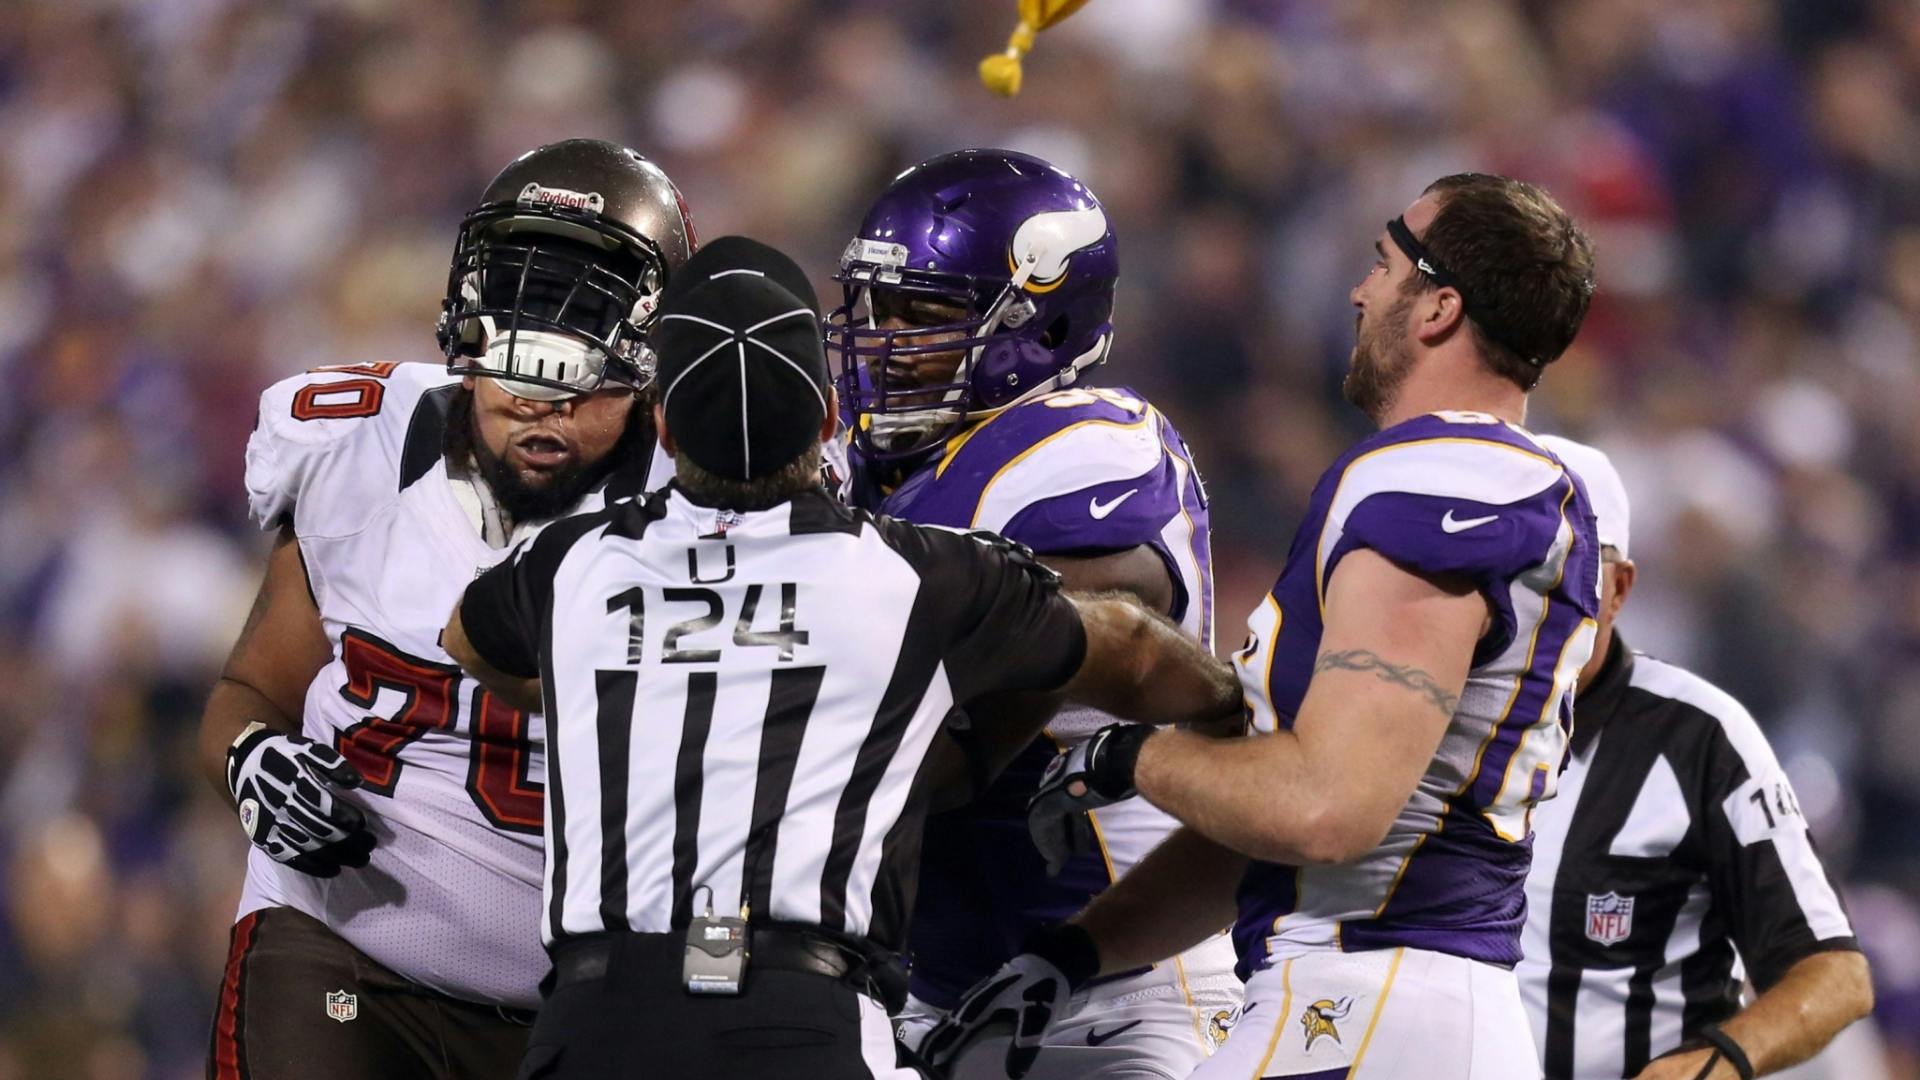 The Minnesota Vikings lost to the Tampa Bay Buccaneers 36-17 and fell to 5-3 on the season.